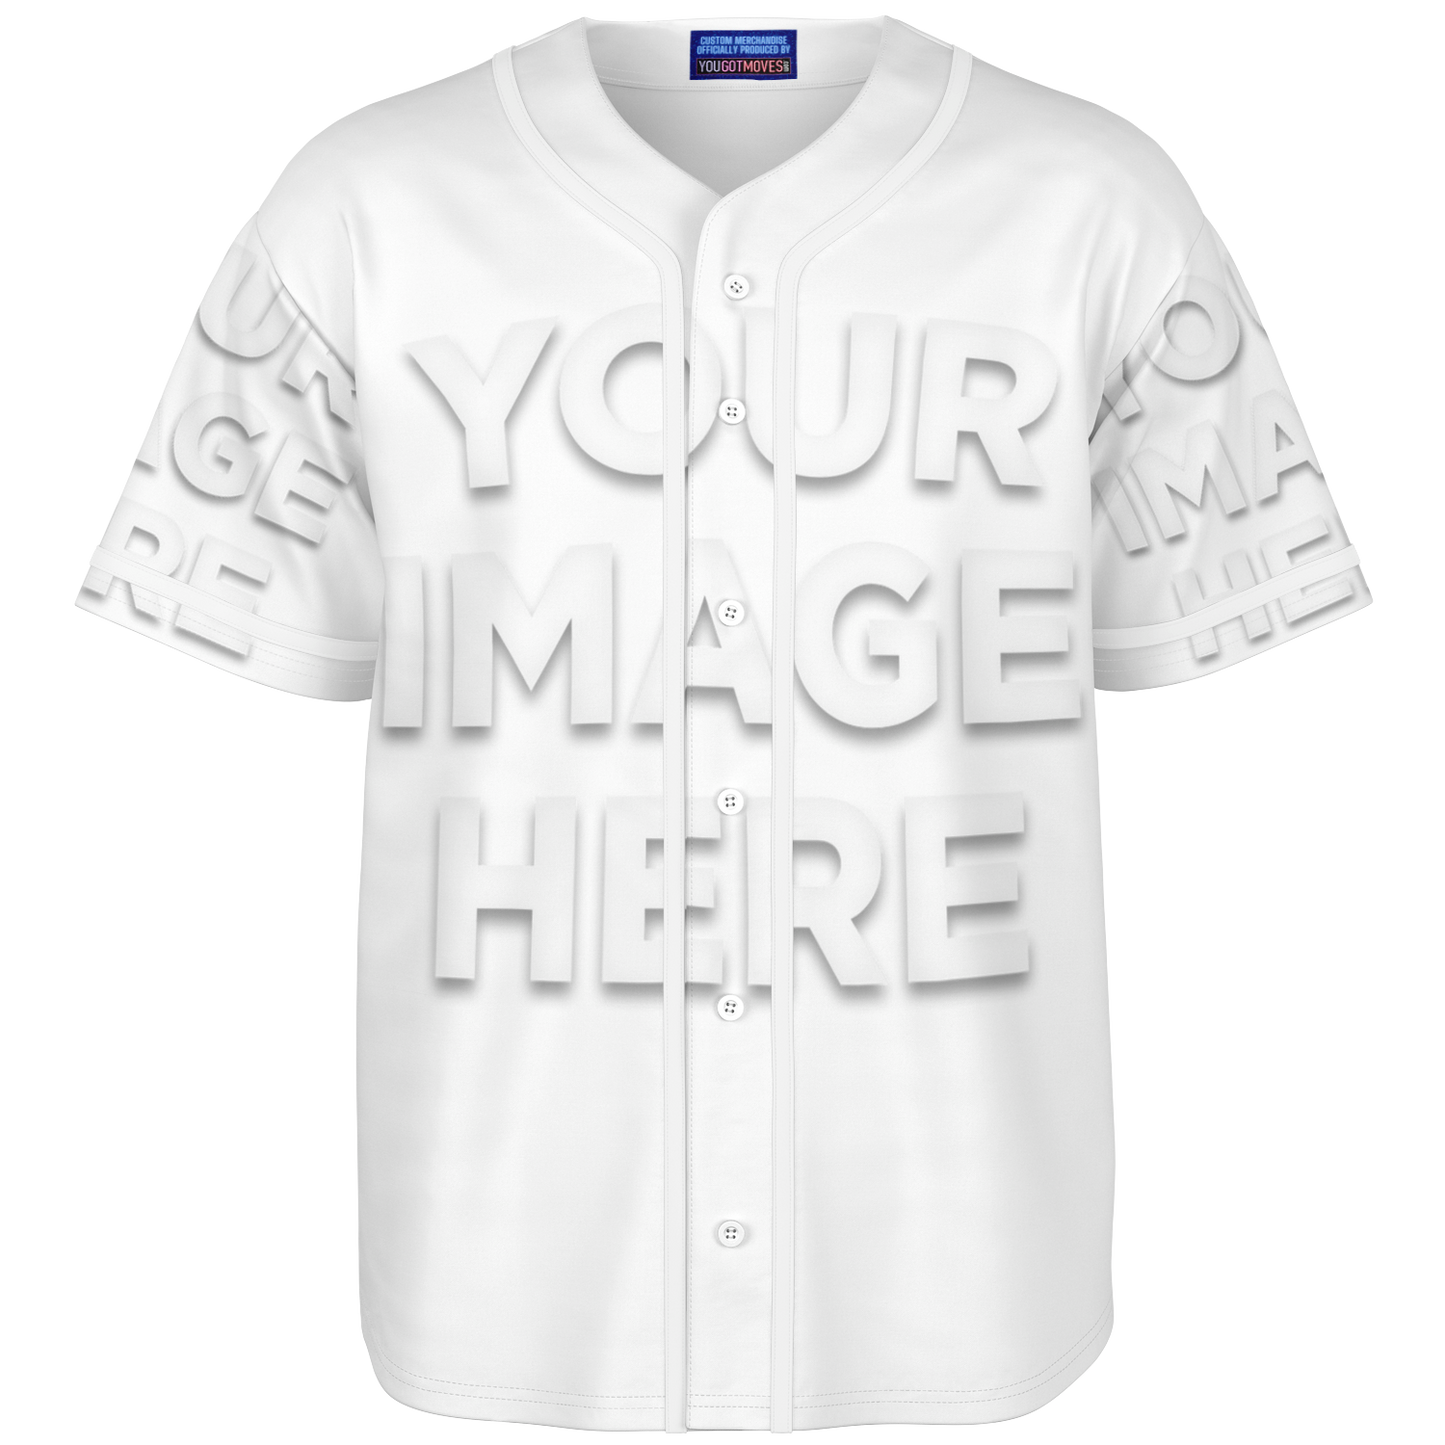 CANVAS BASEBALL JERSEY - BUILD YOUR OWN YGM